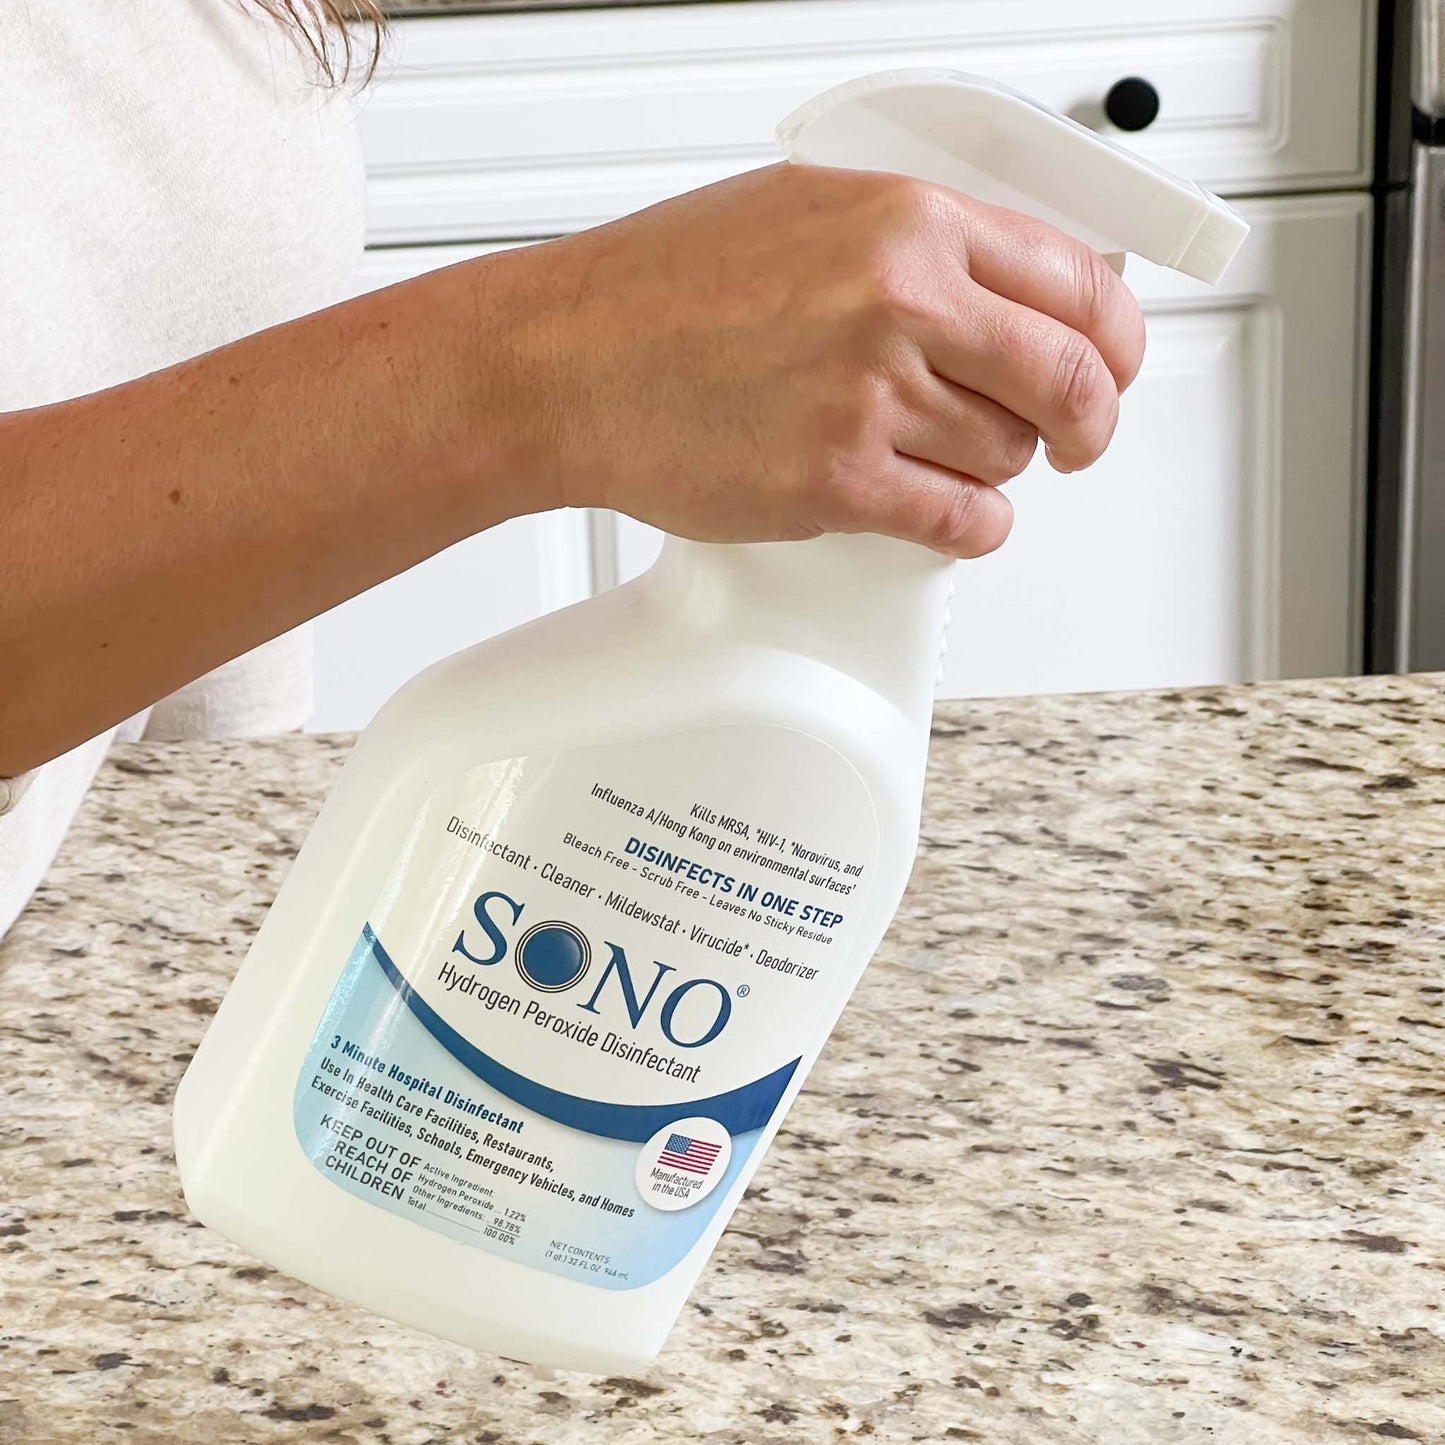 SONO Disinfecting Spray and Stain Remover - 32 oz (6 PACK)